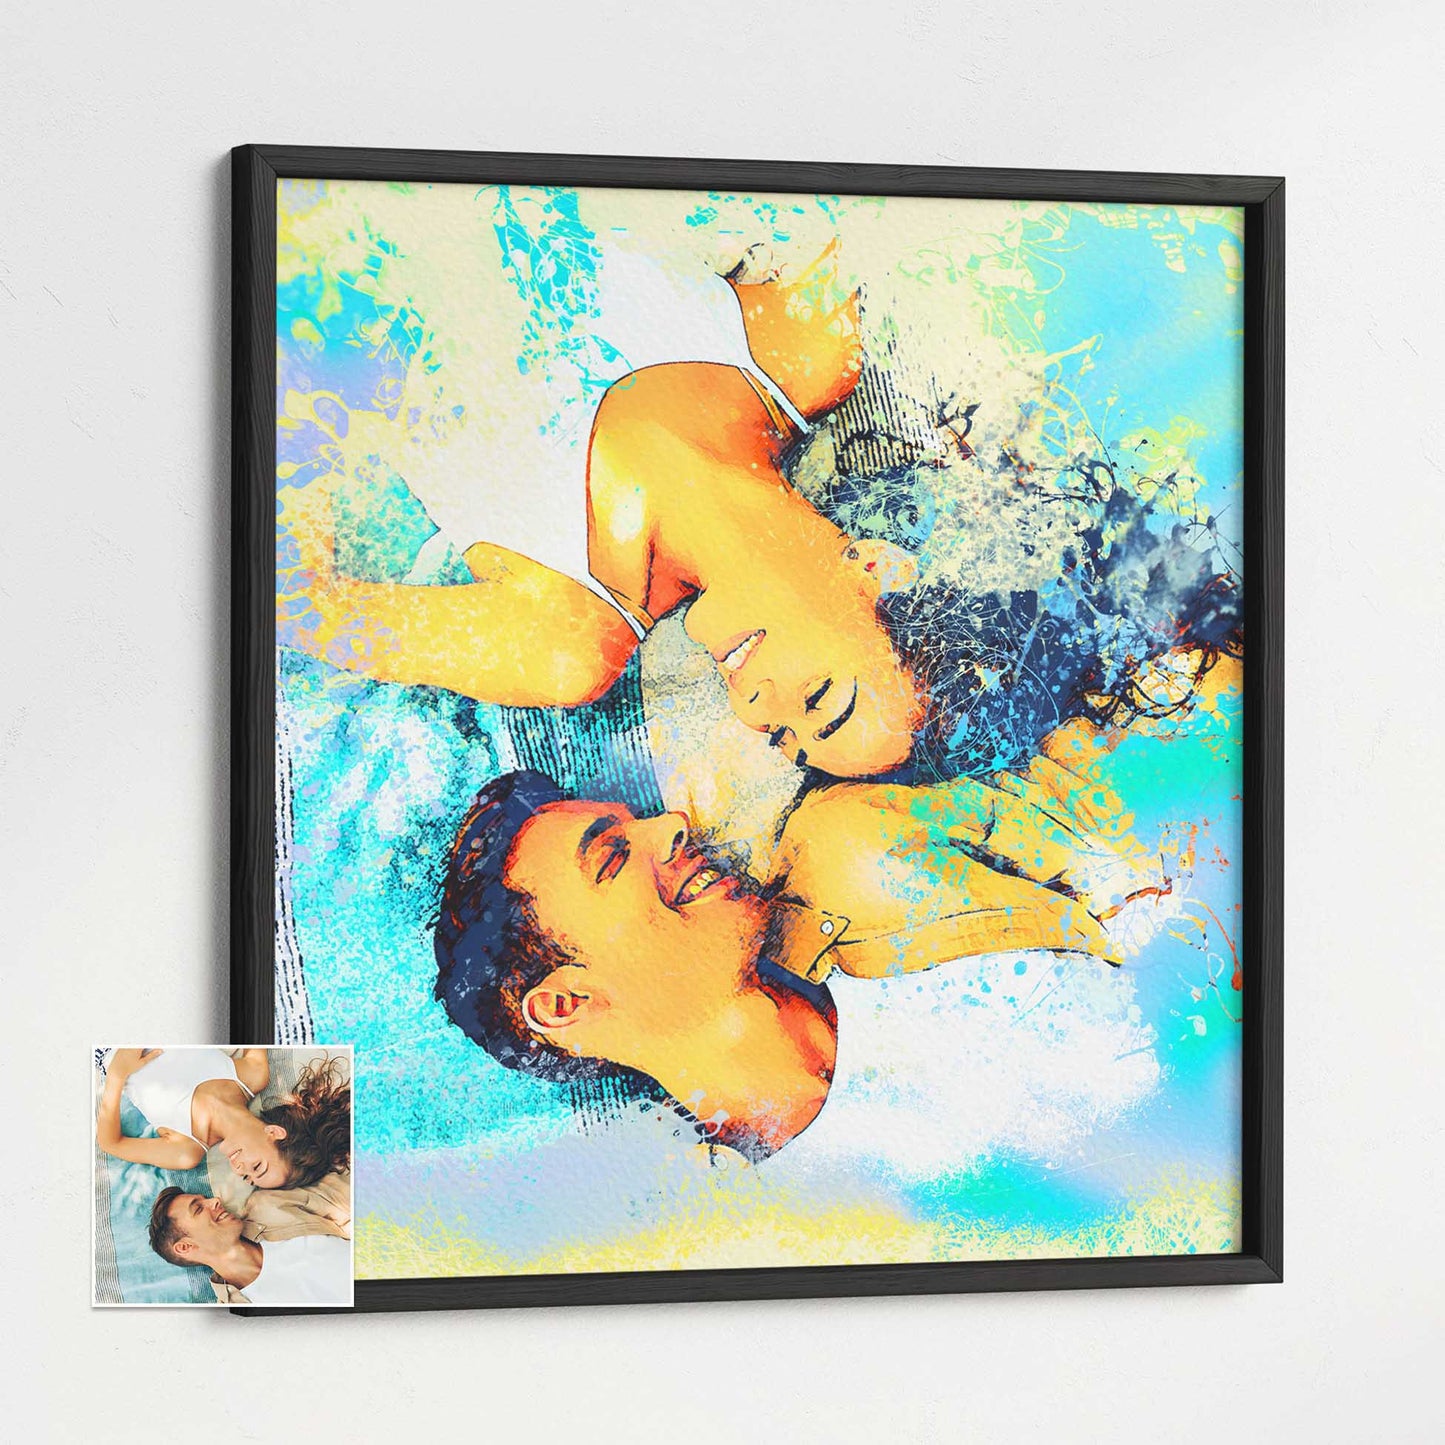 Quirky and Unique Interior Design Piece: Make a statement with this personalised watercolour splash framed print. Its unconventional and quirky design adds a touch of personality and charm to your interior decor